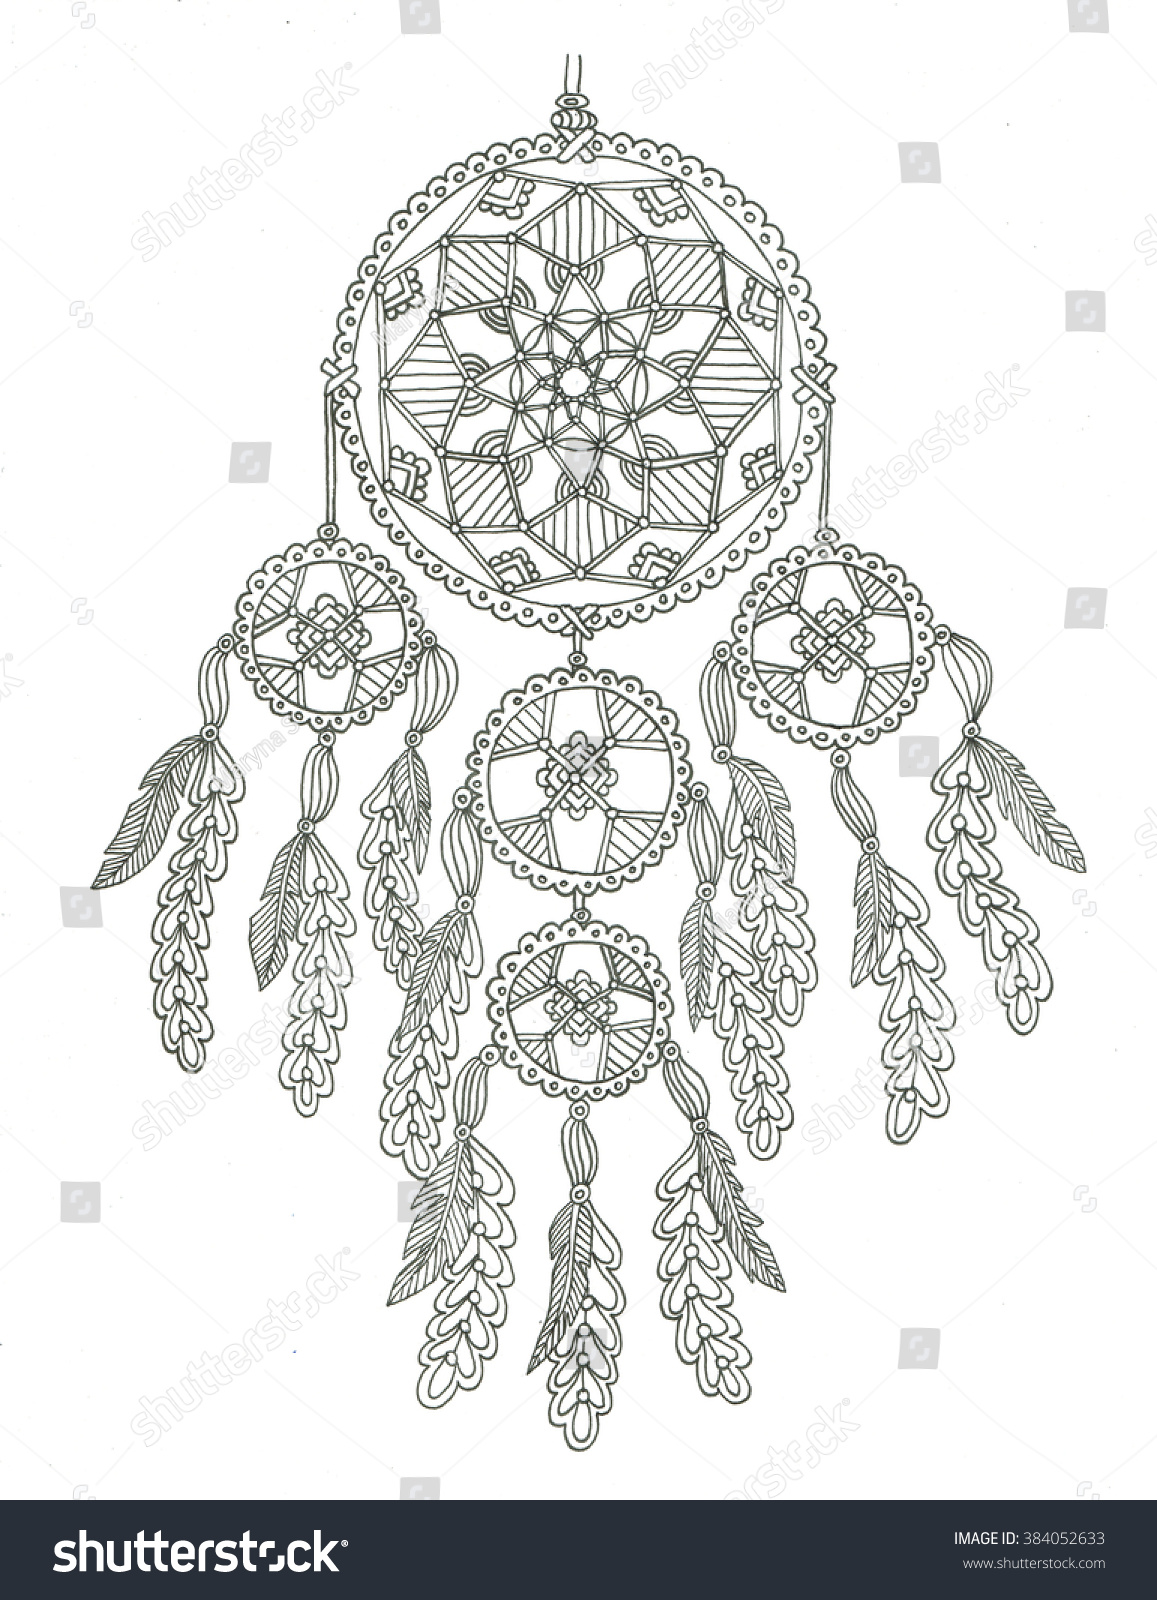 dream catcher coloring page stock illustration 384052633